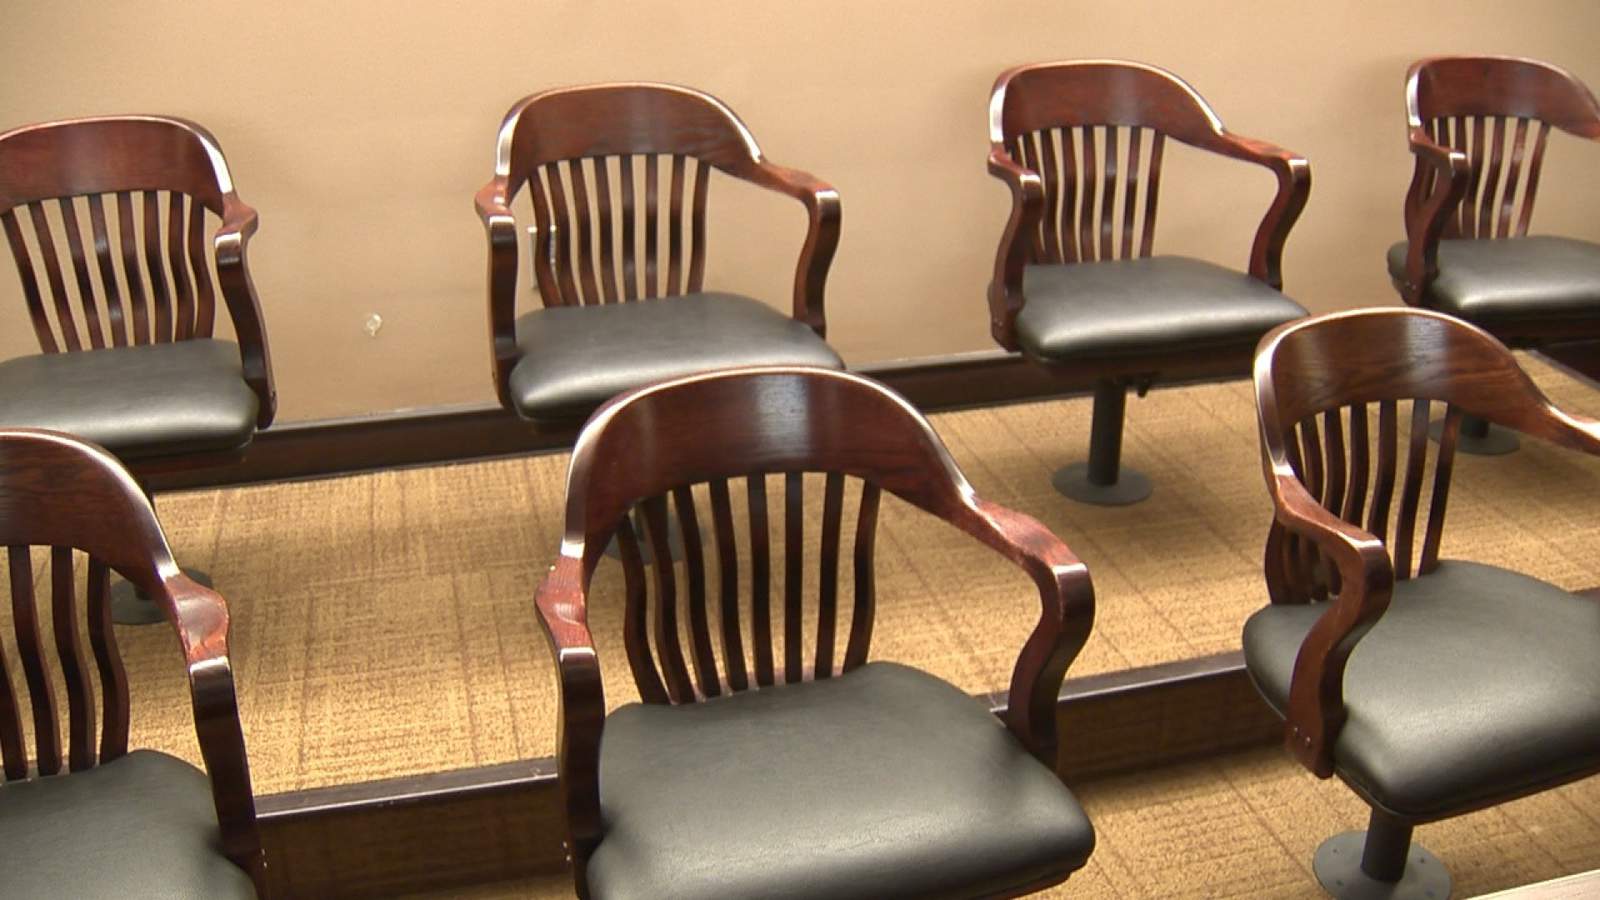 Moratorium on jury service extended in Bexar County